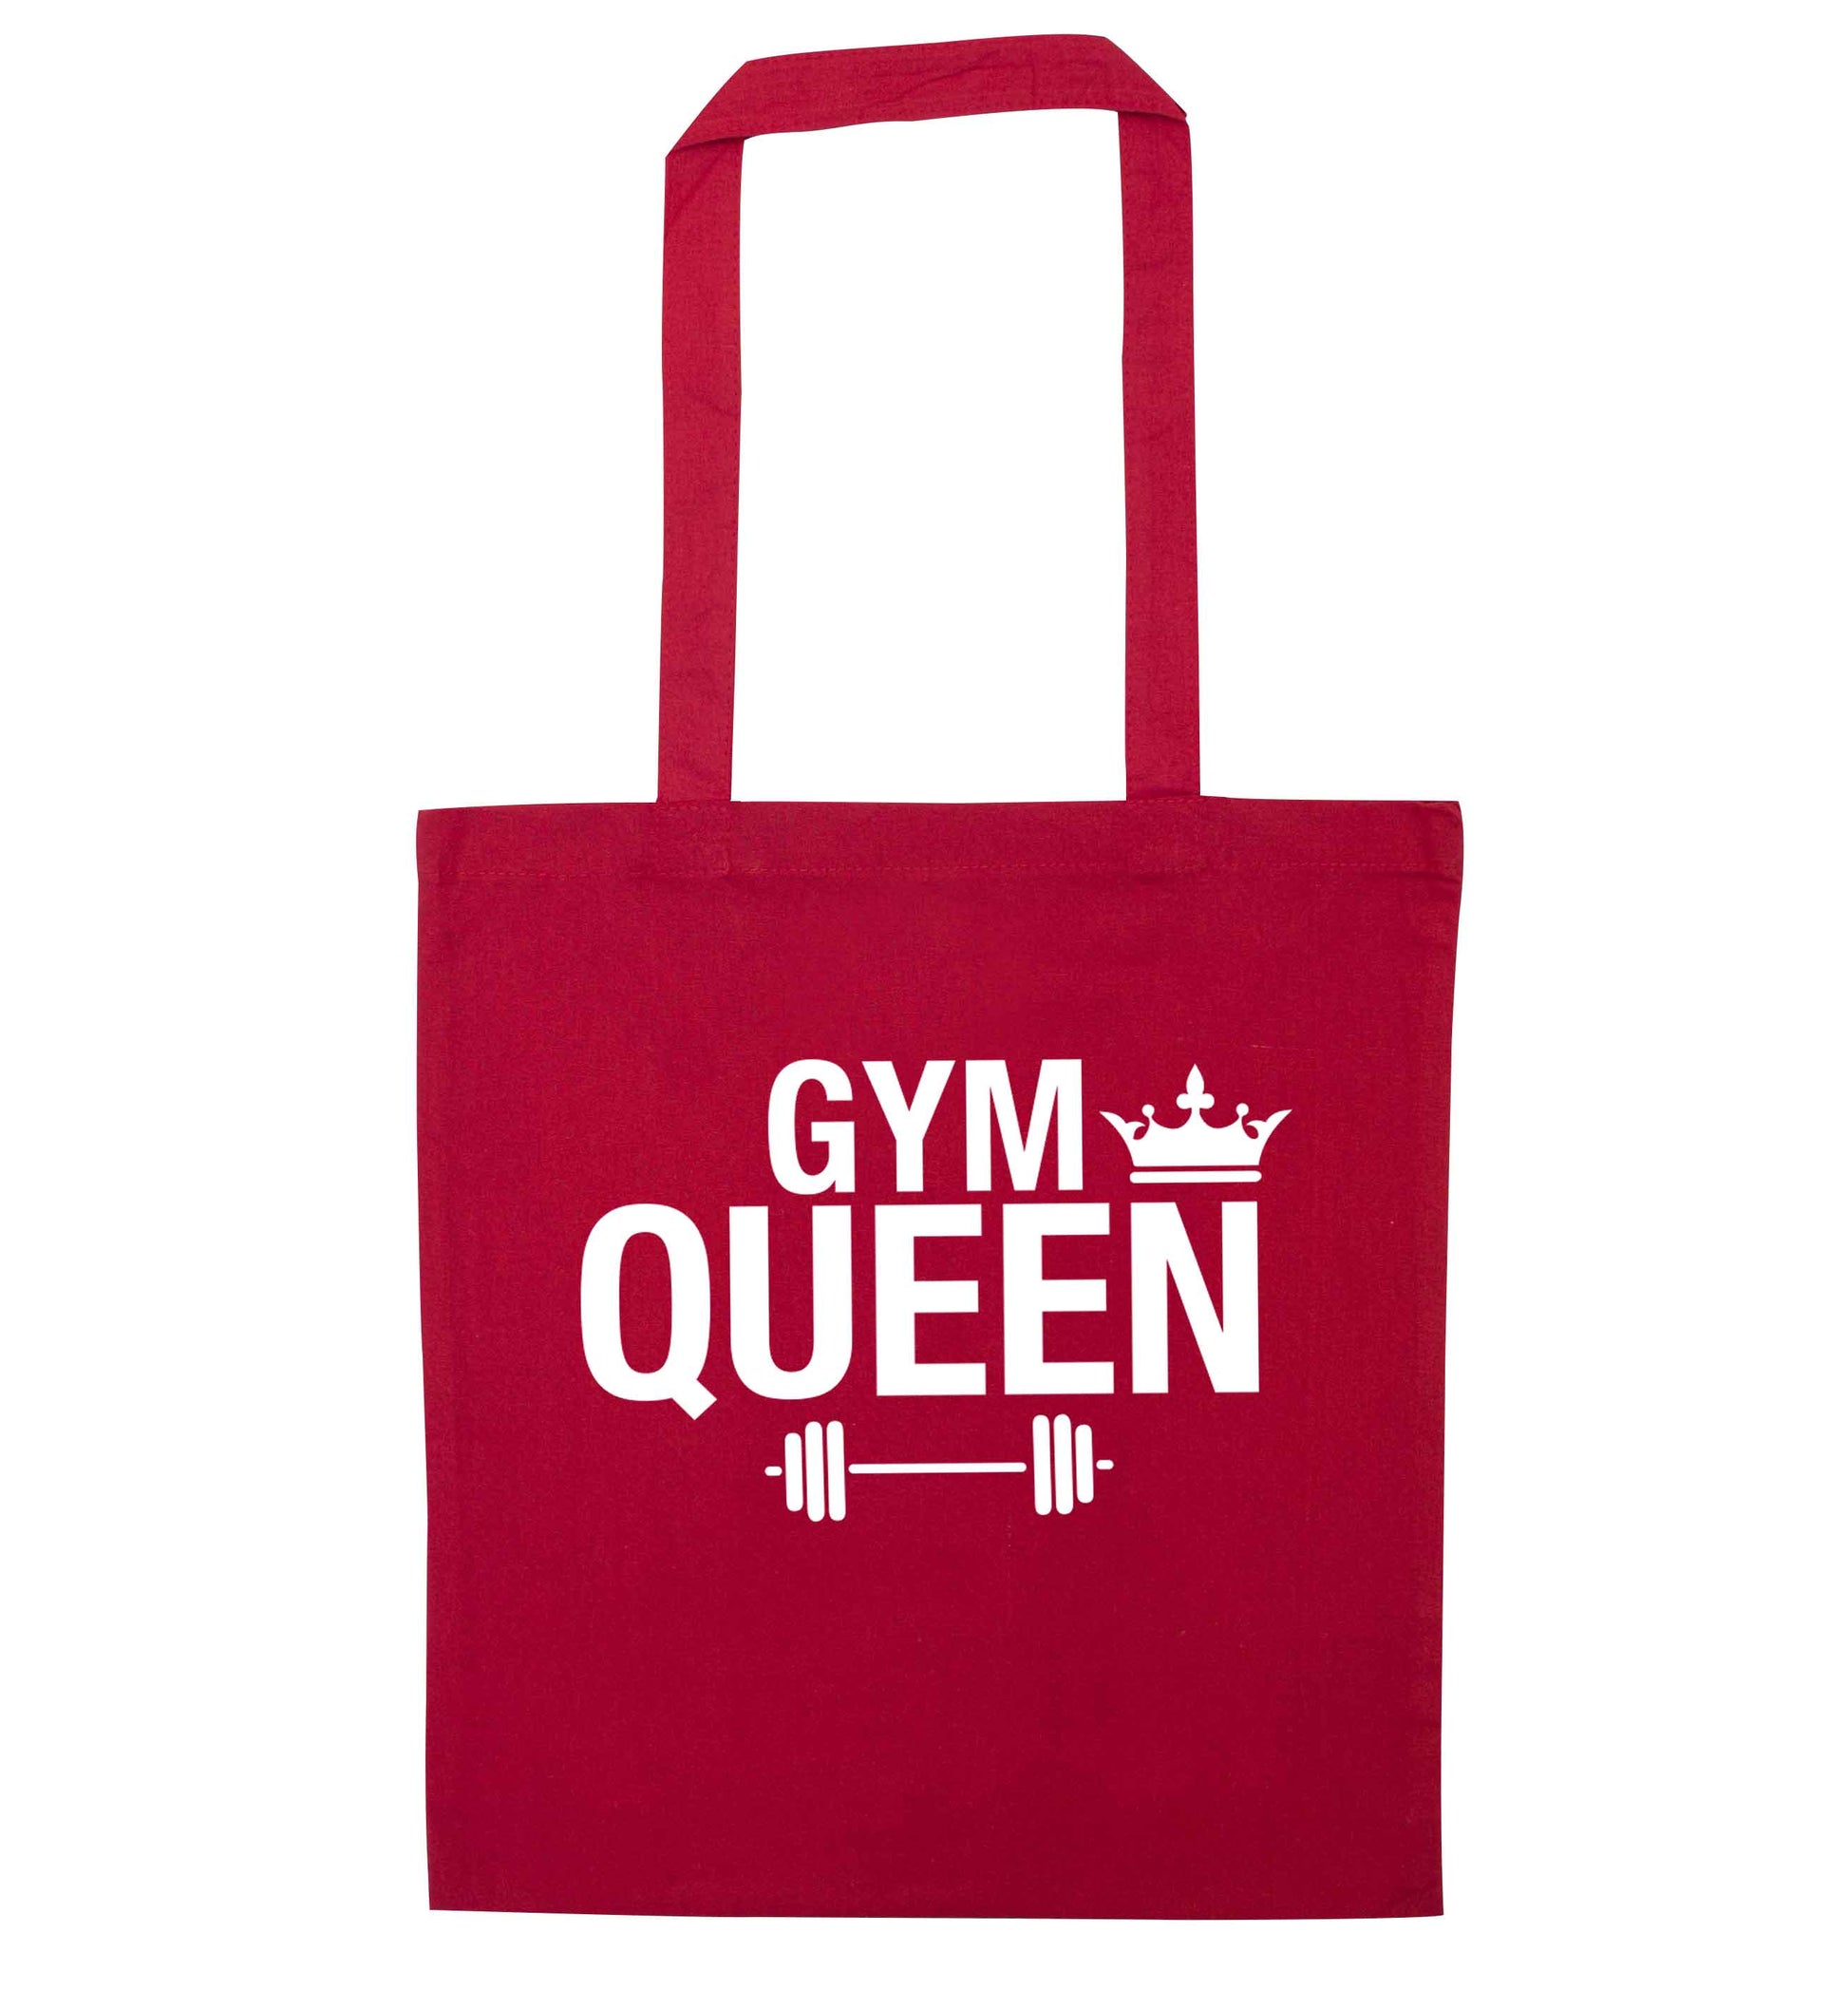 Gym queen red tote bag